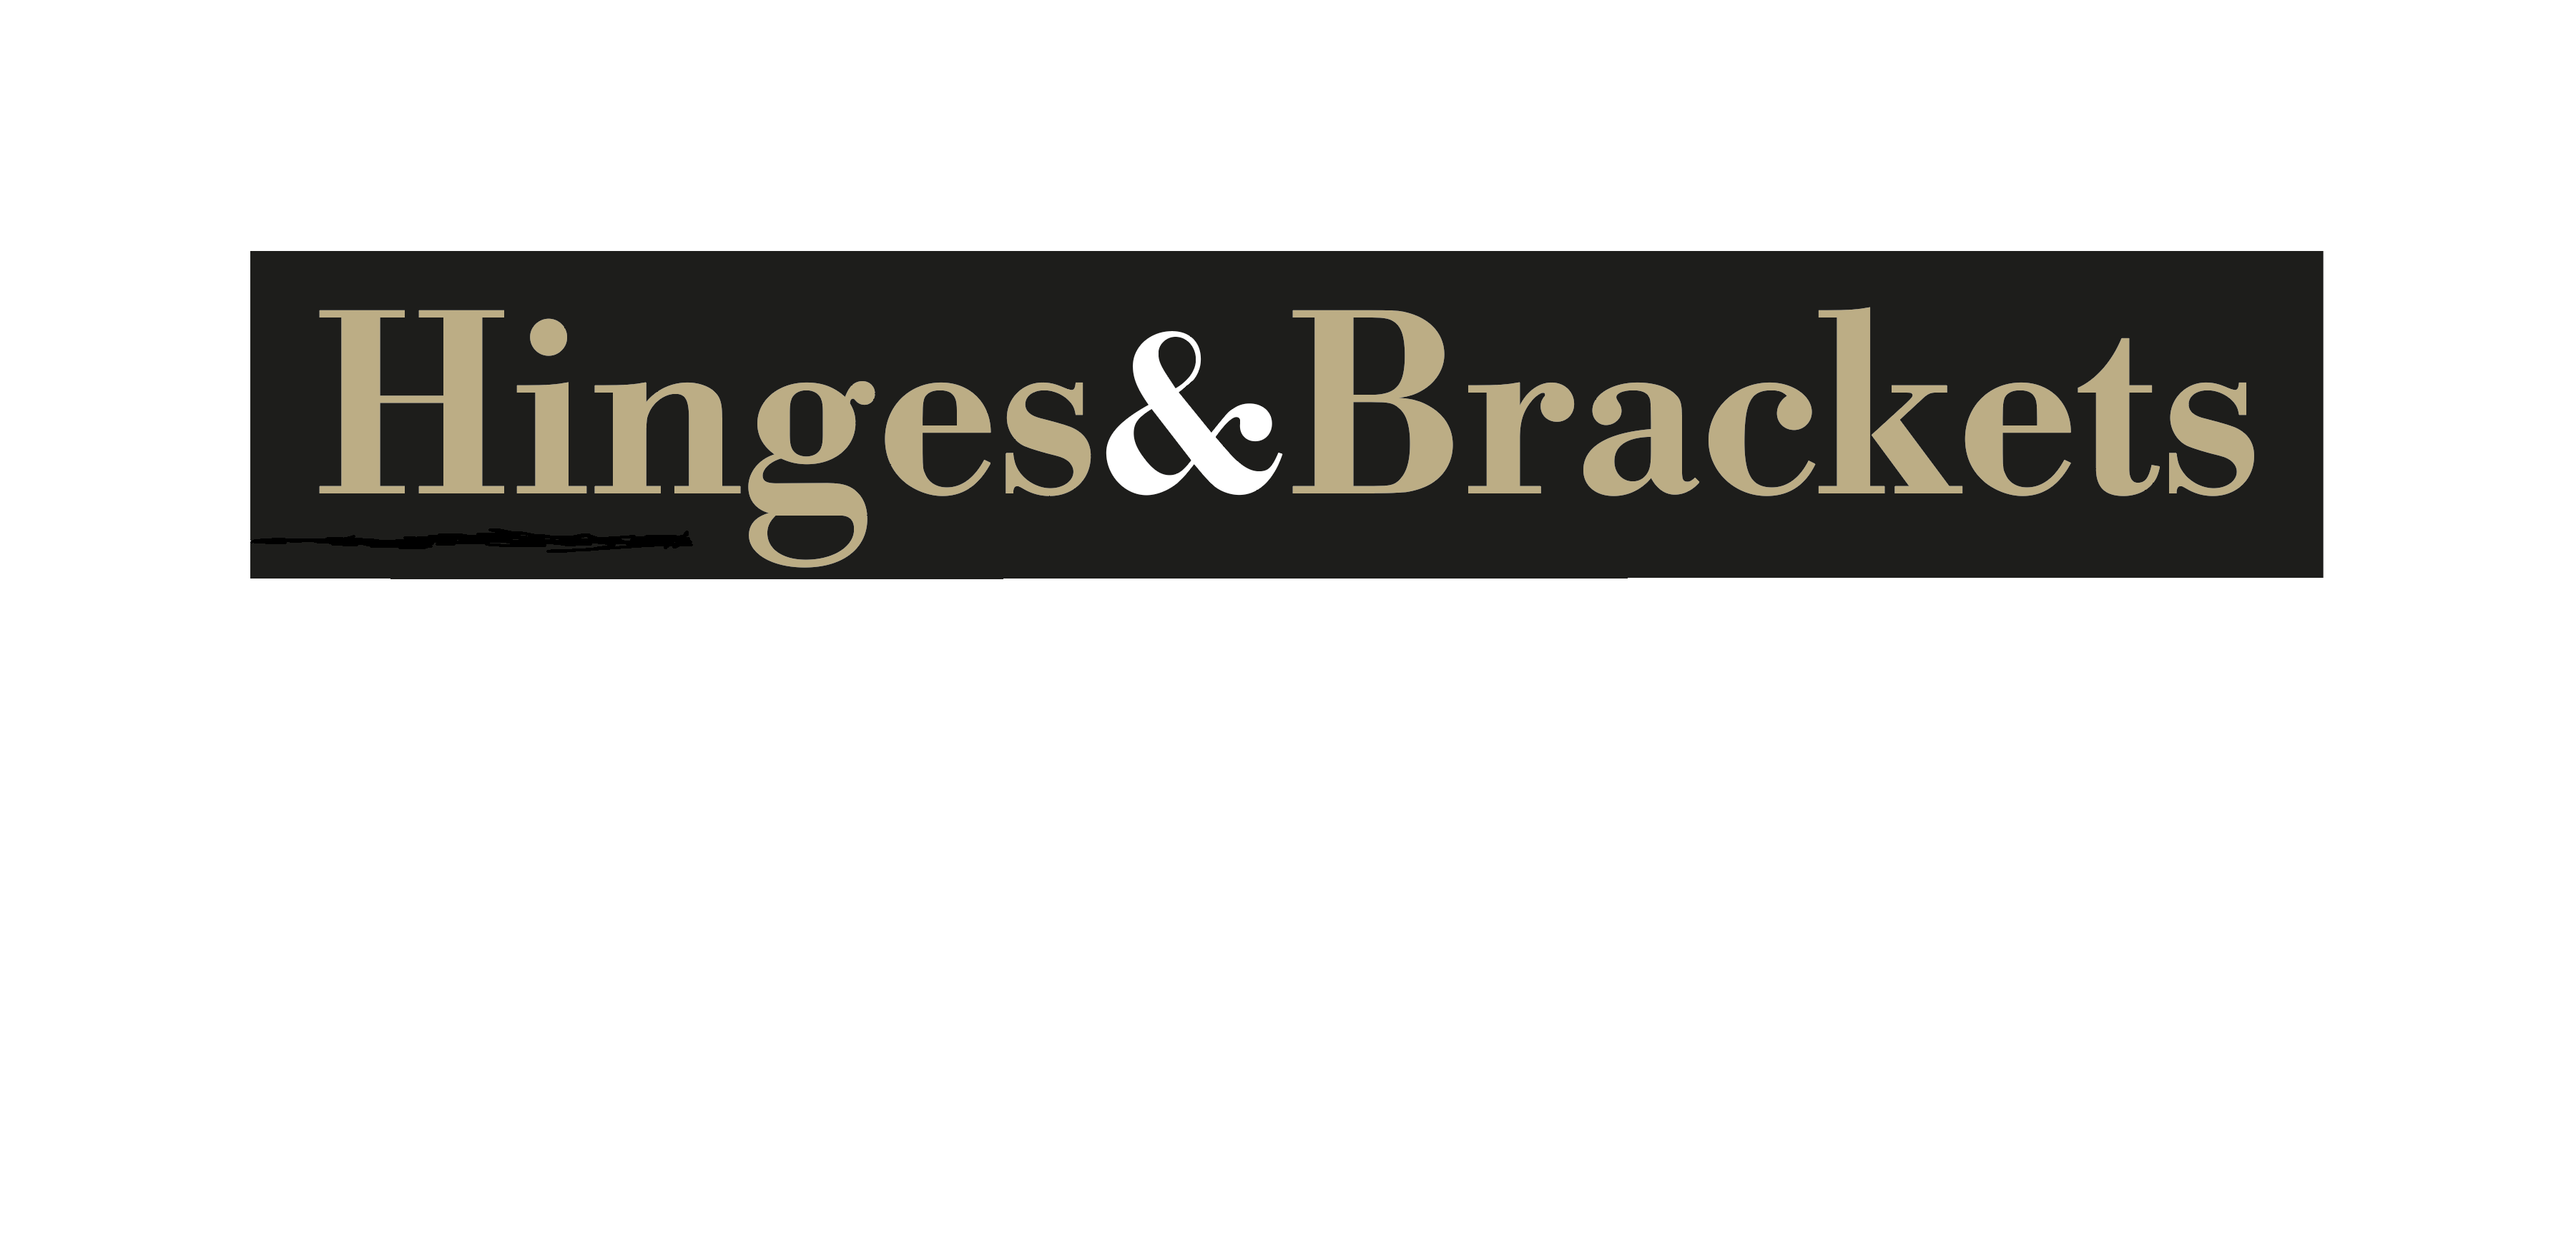 Hinges and Bracket Trading LLP